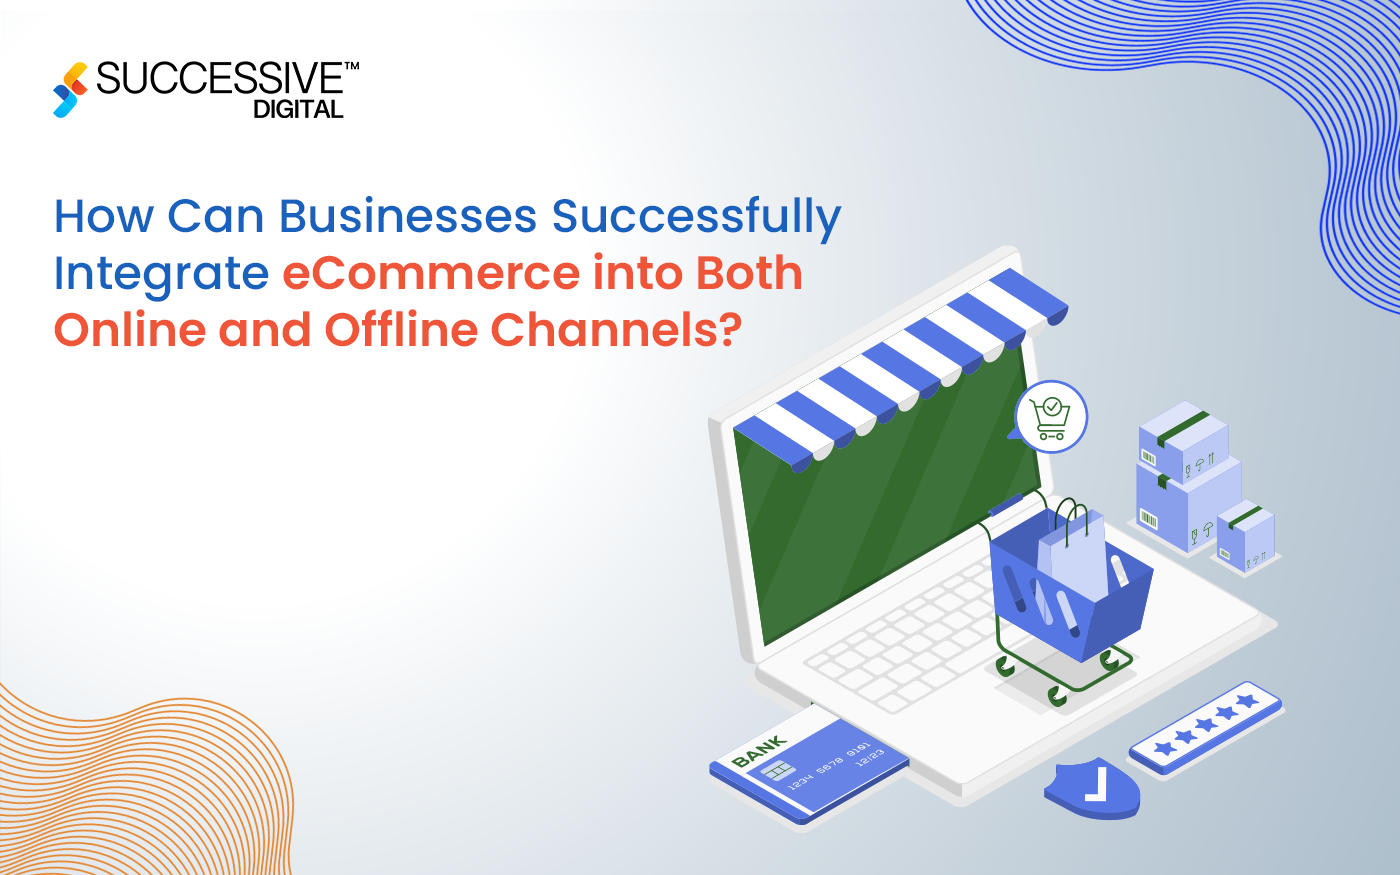 How Can Businesses Successfully Integrate eCommerce into Both Online and Offline Channels?